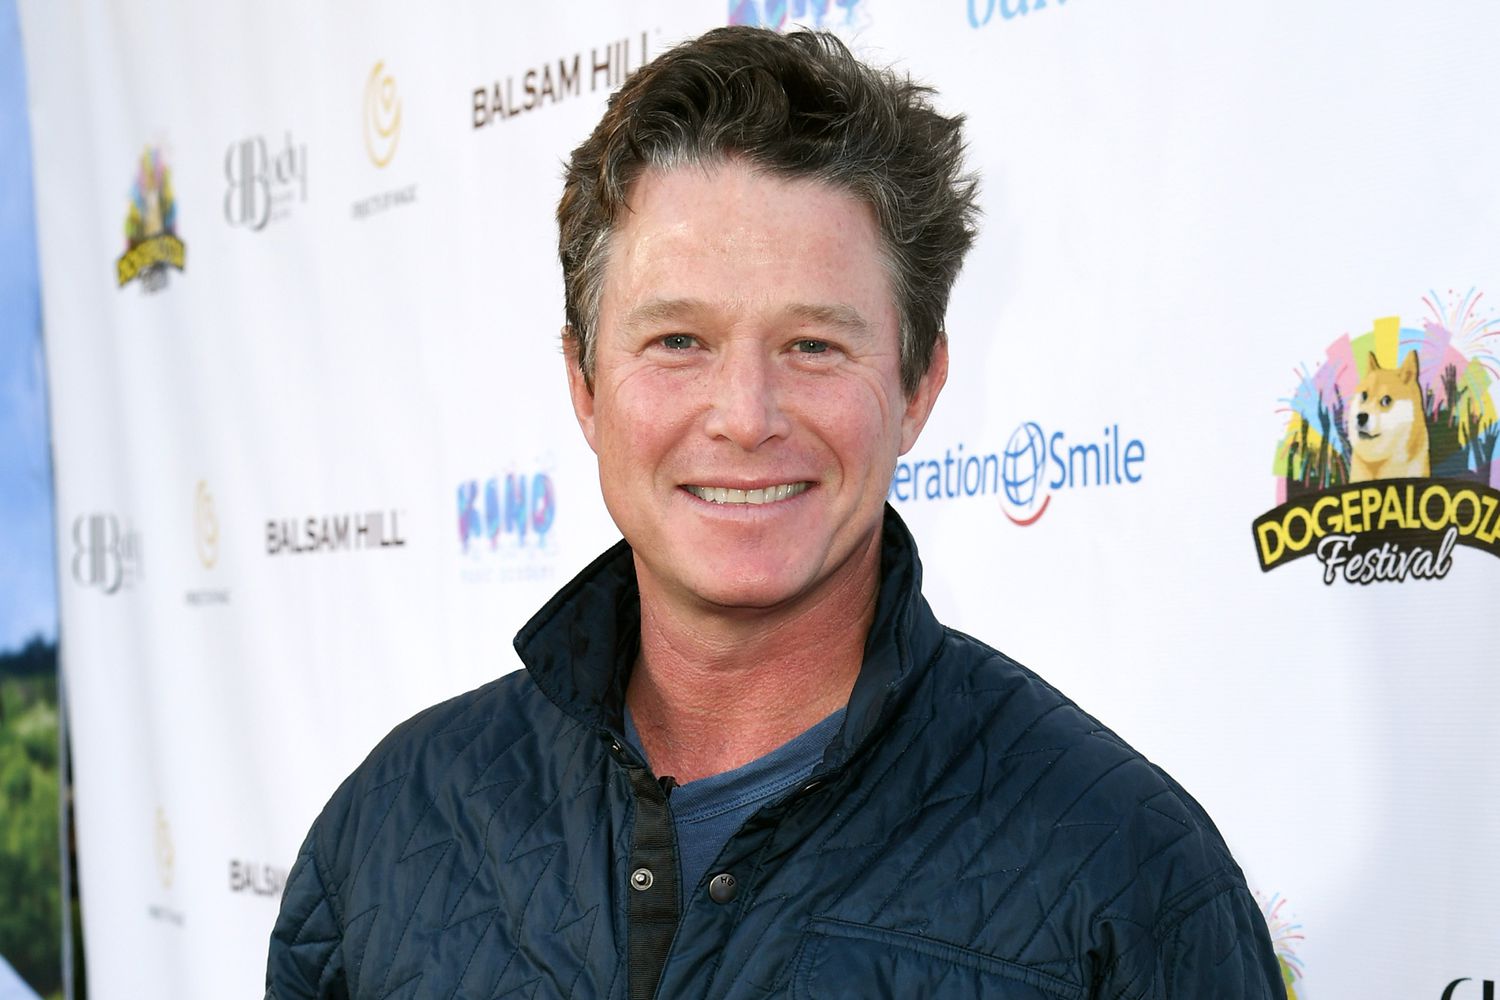 Billy Bush attends Celebration of Smiles Event hosted by Dionne Warwick on her 81st Birthday to benefit medical charity organization, Operation Smile and The Kind Music Academy on December 12, 2021 in Malibu, California